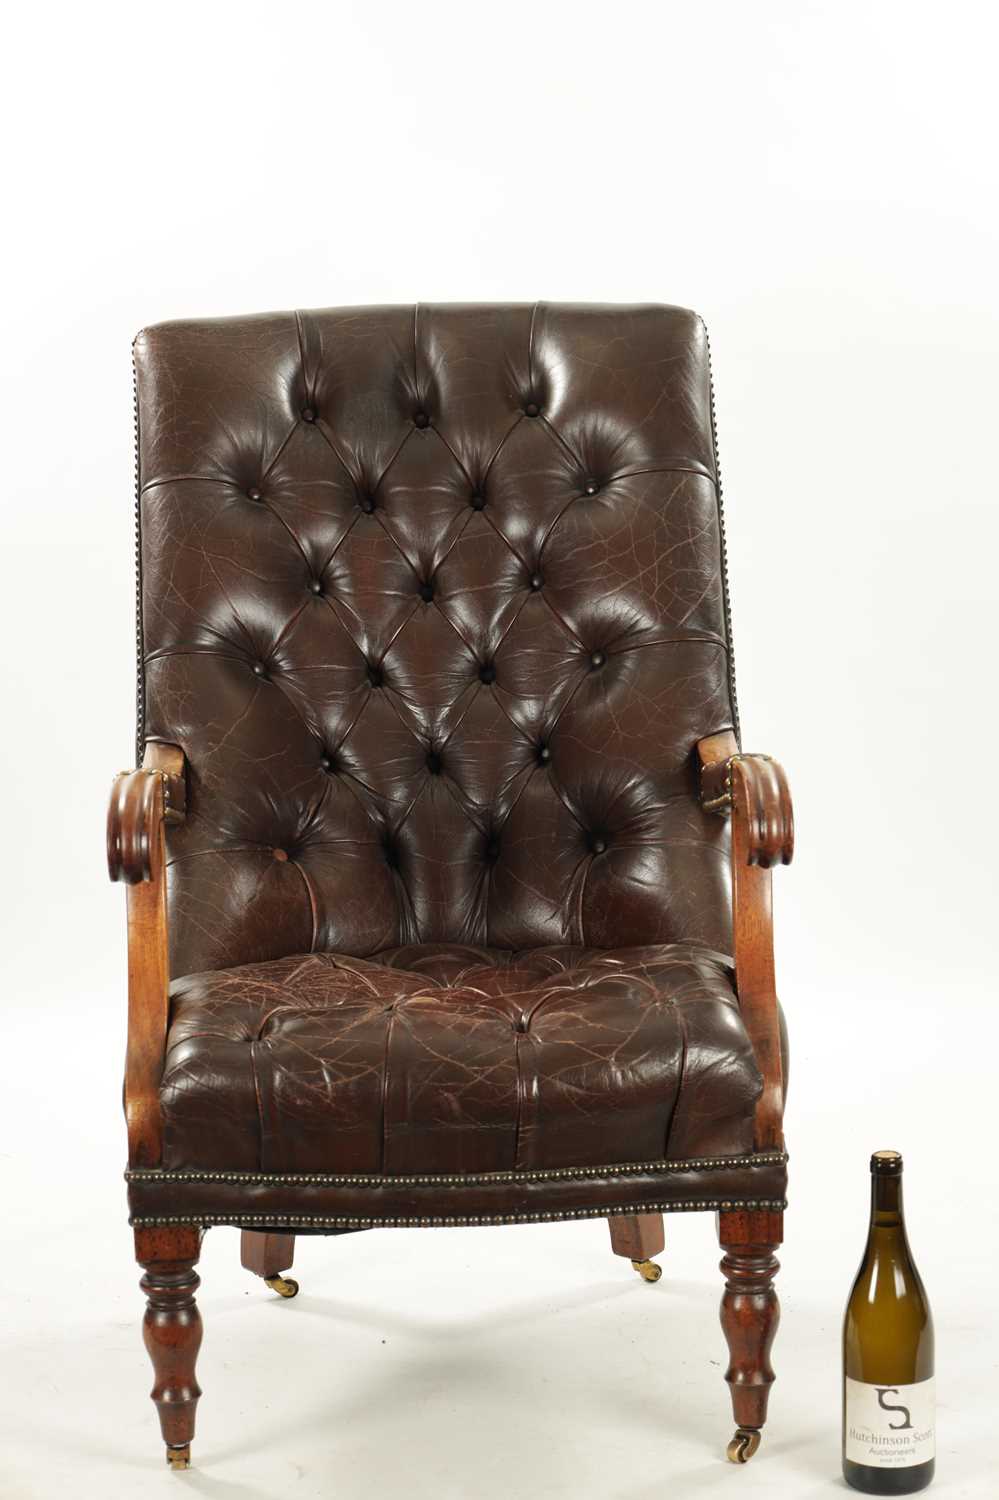 A WILLIAM IV LEATHER BUTTON BACK LEATHER UPHOLSTERED MAHOGANY LIBRARY CHIAR - Image 6 of 8